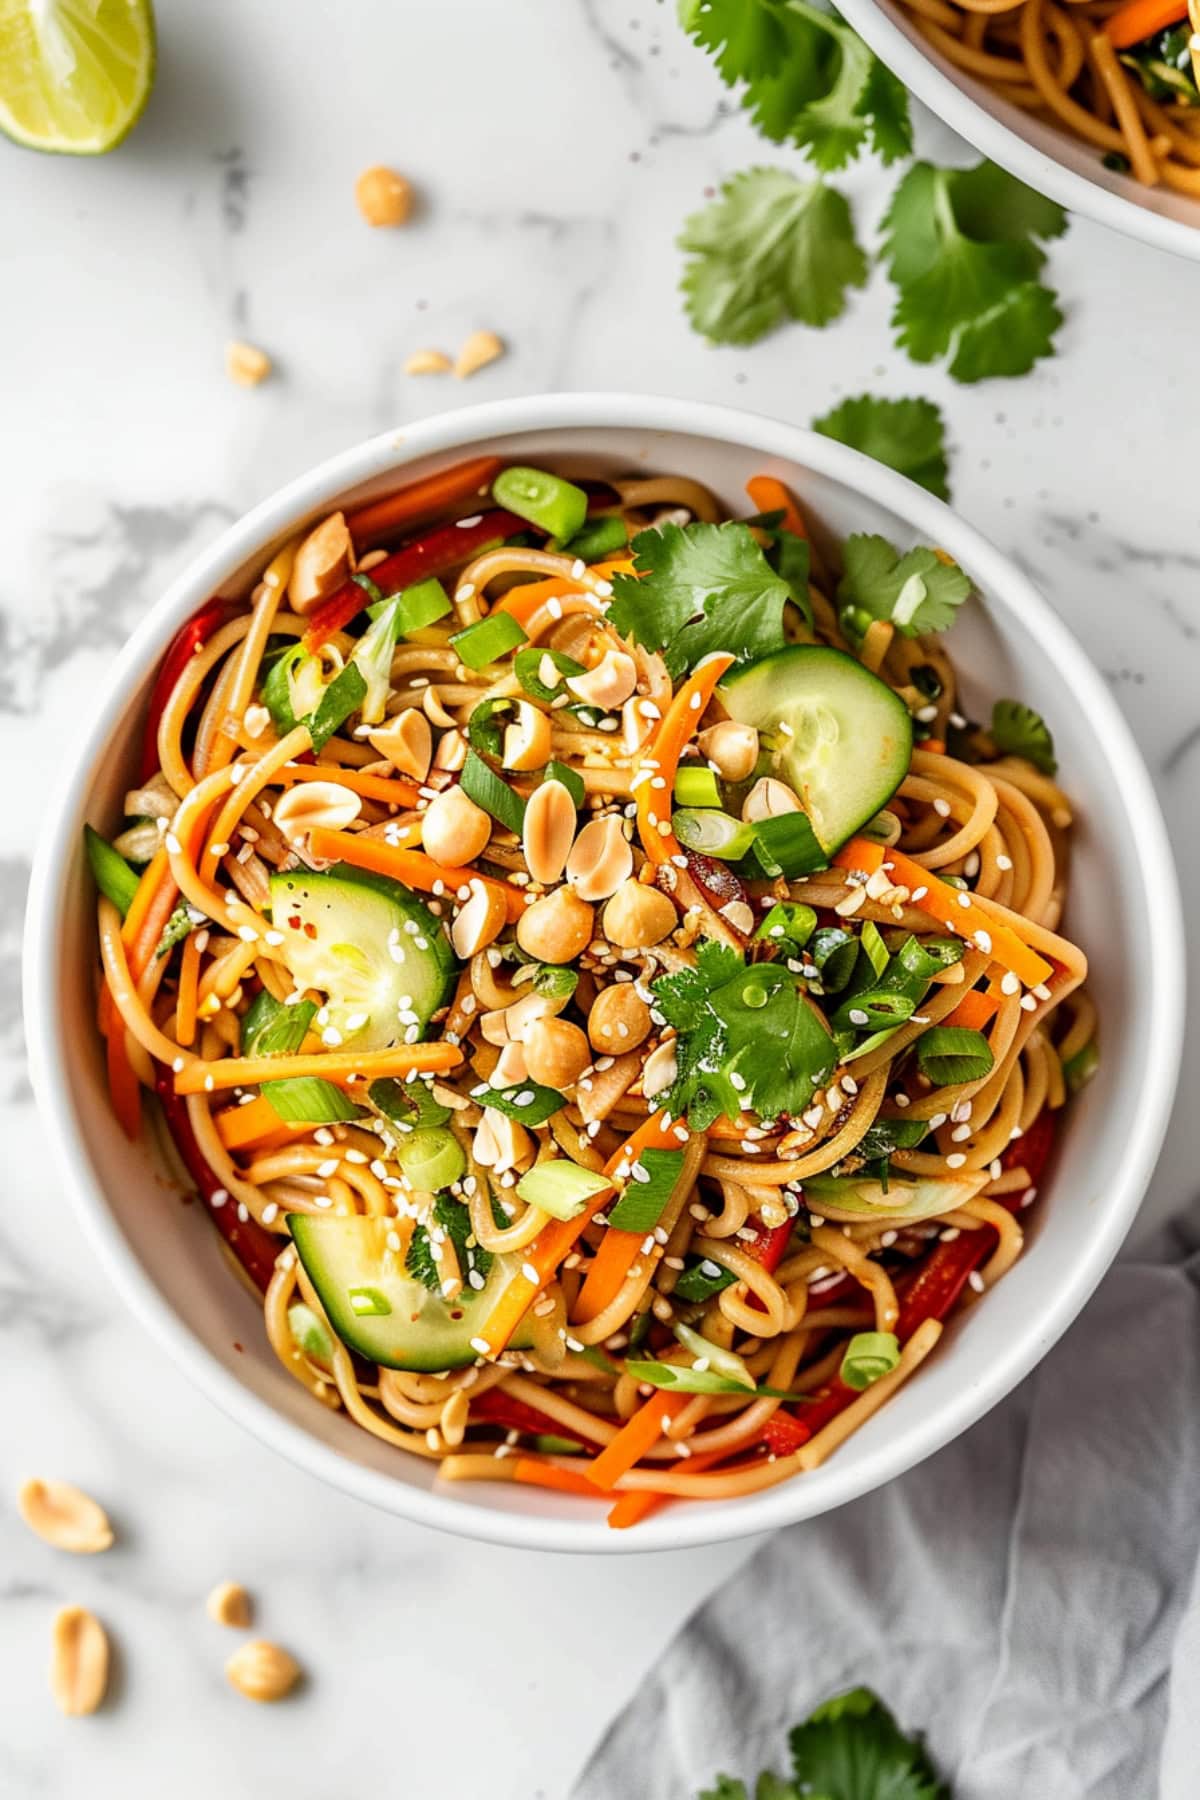 Crispy and tender noodle salad topped with peanuts, cucumbers, green onions, carrots and cilantro.